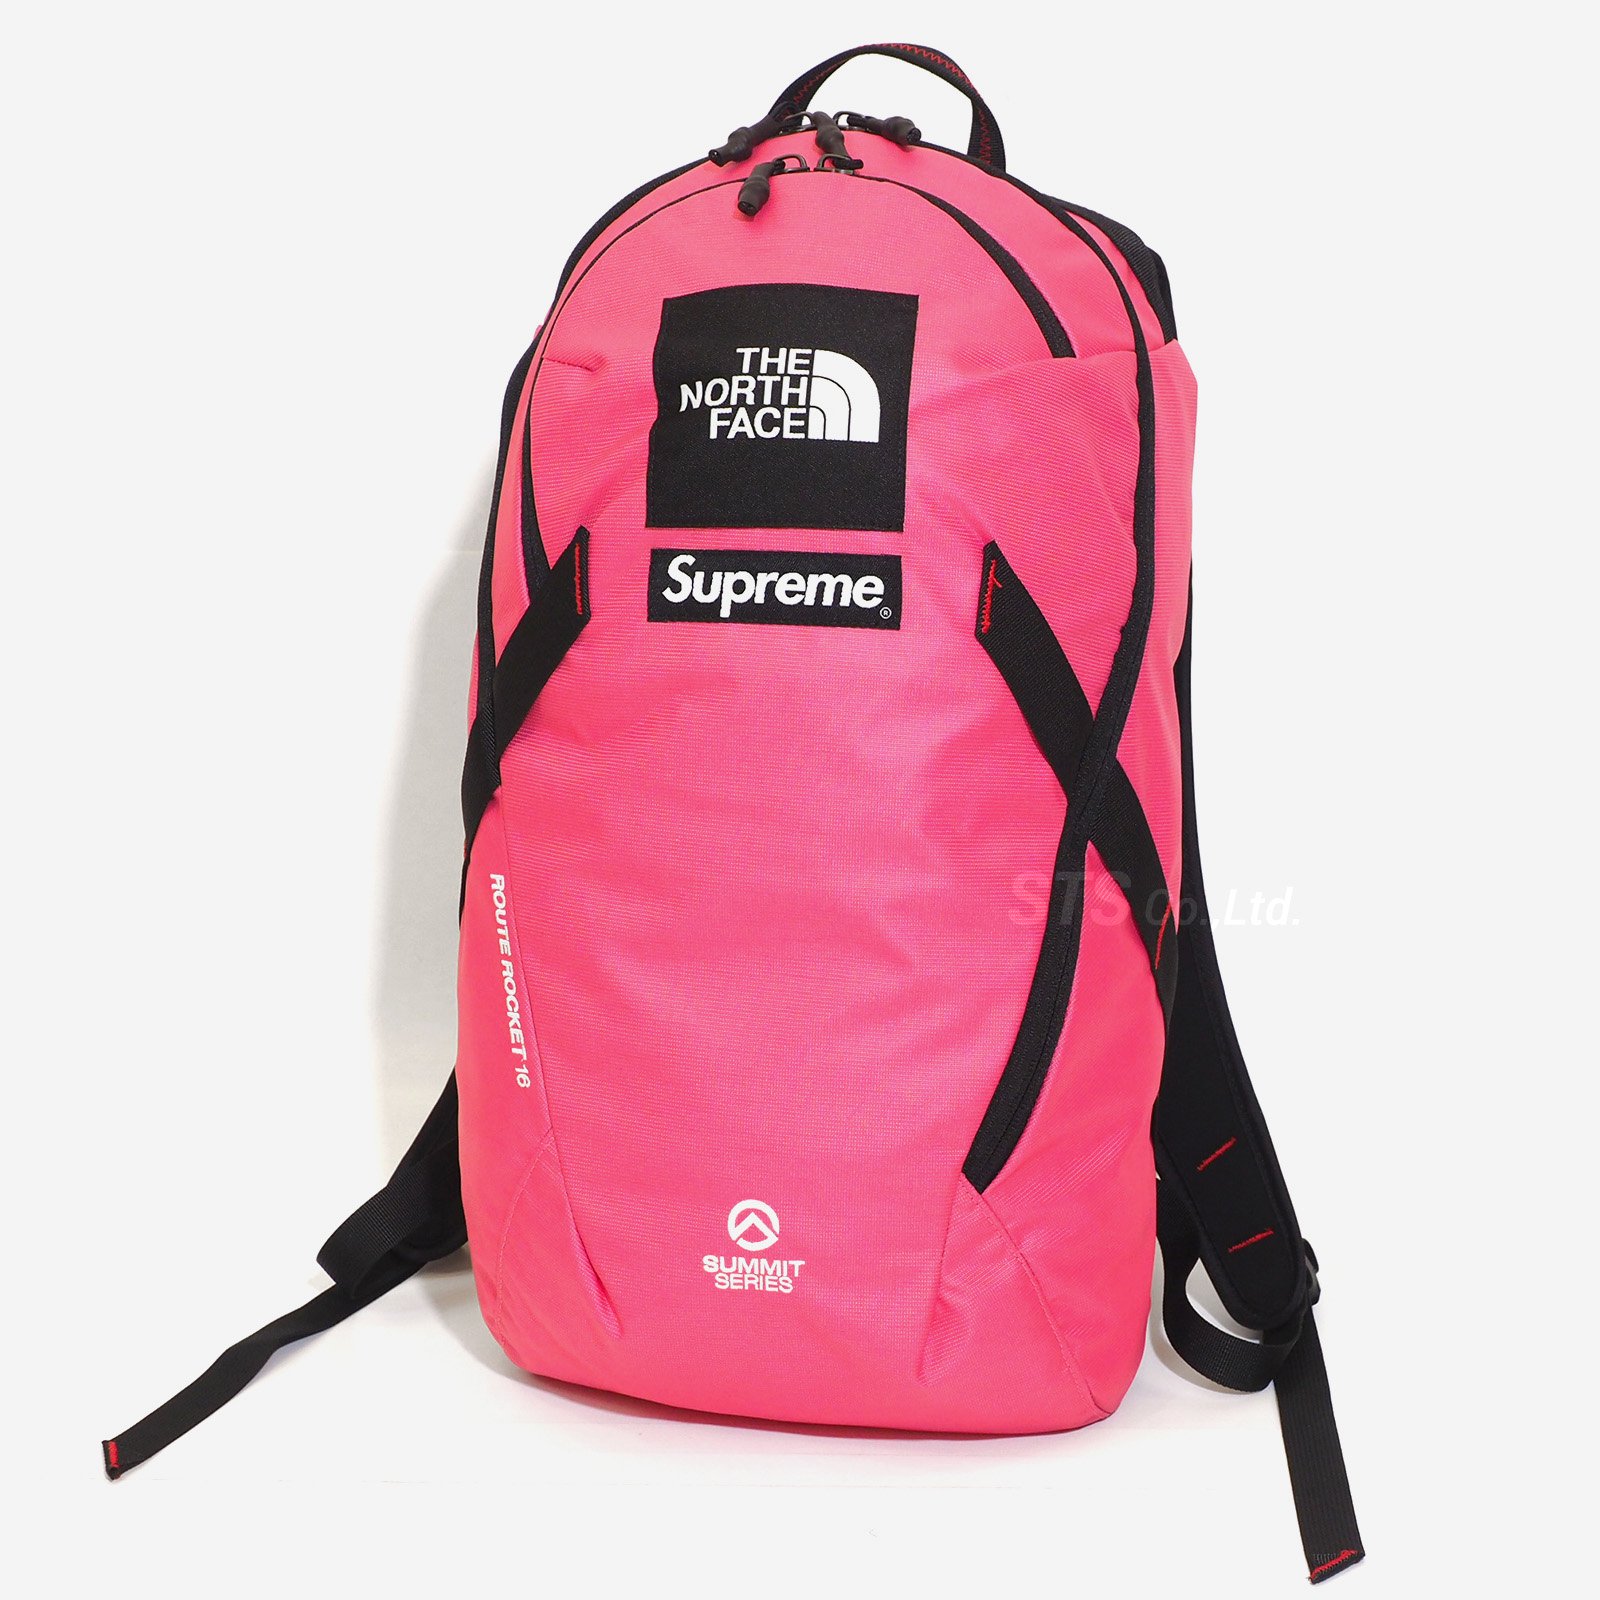 Supreme / The North Face Backpack 16L